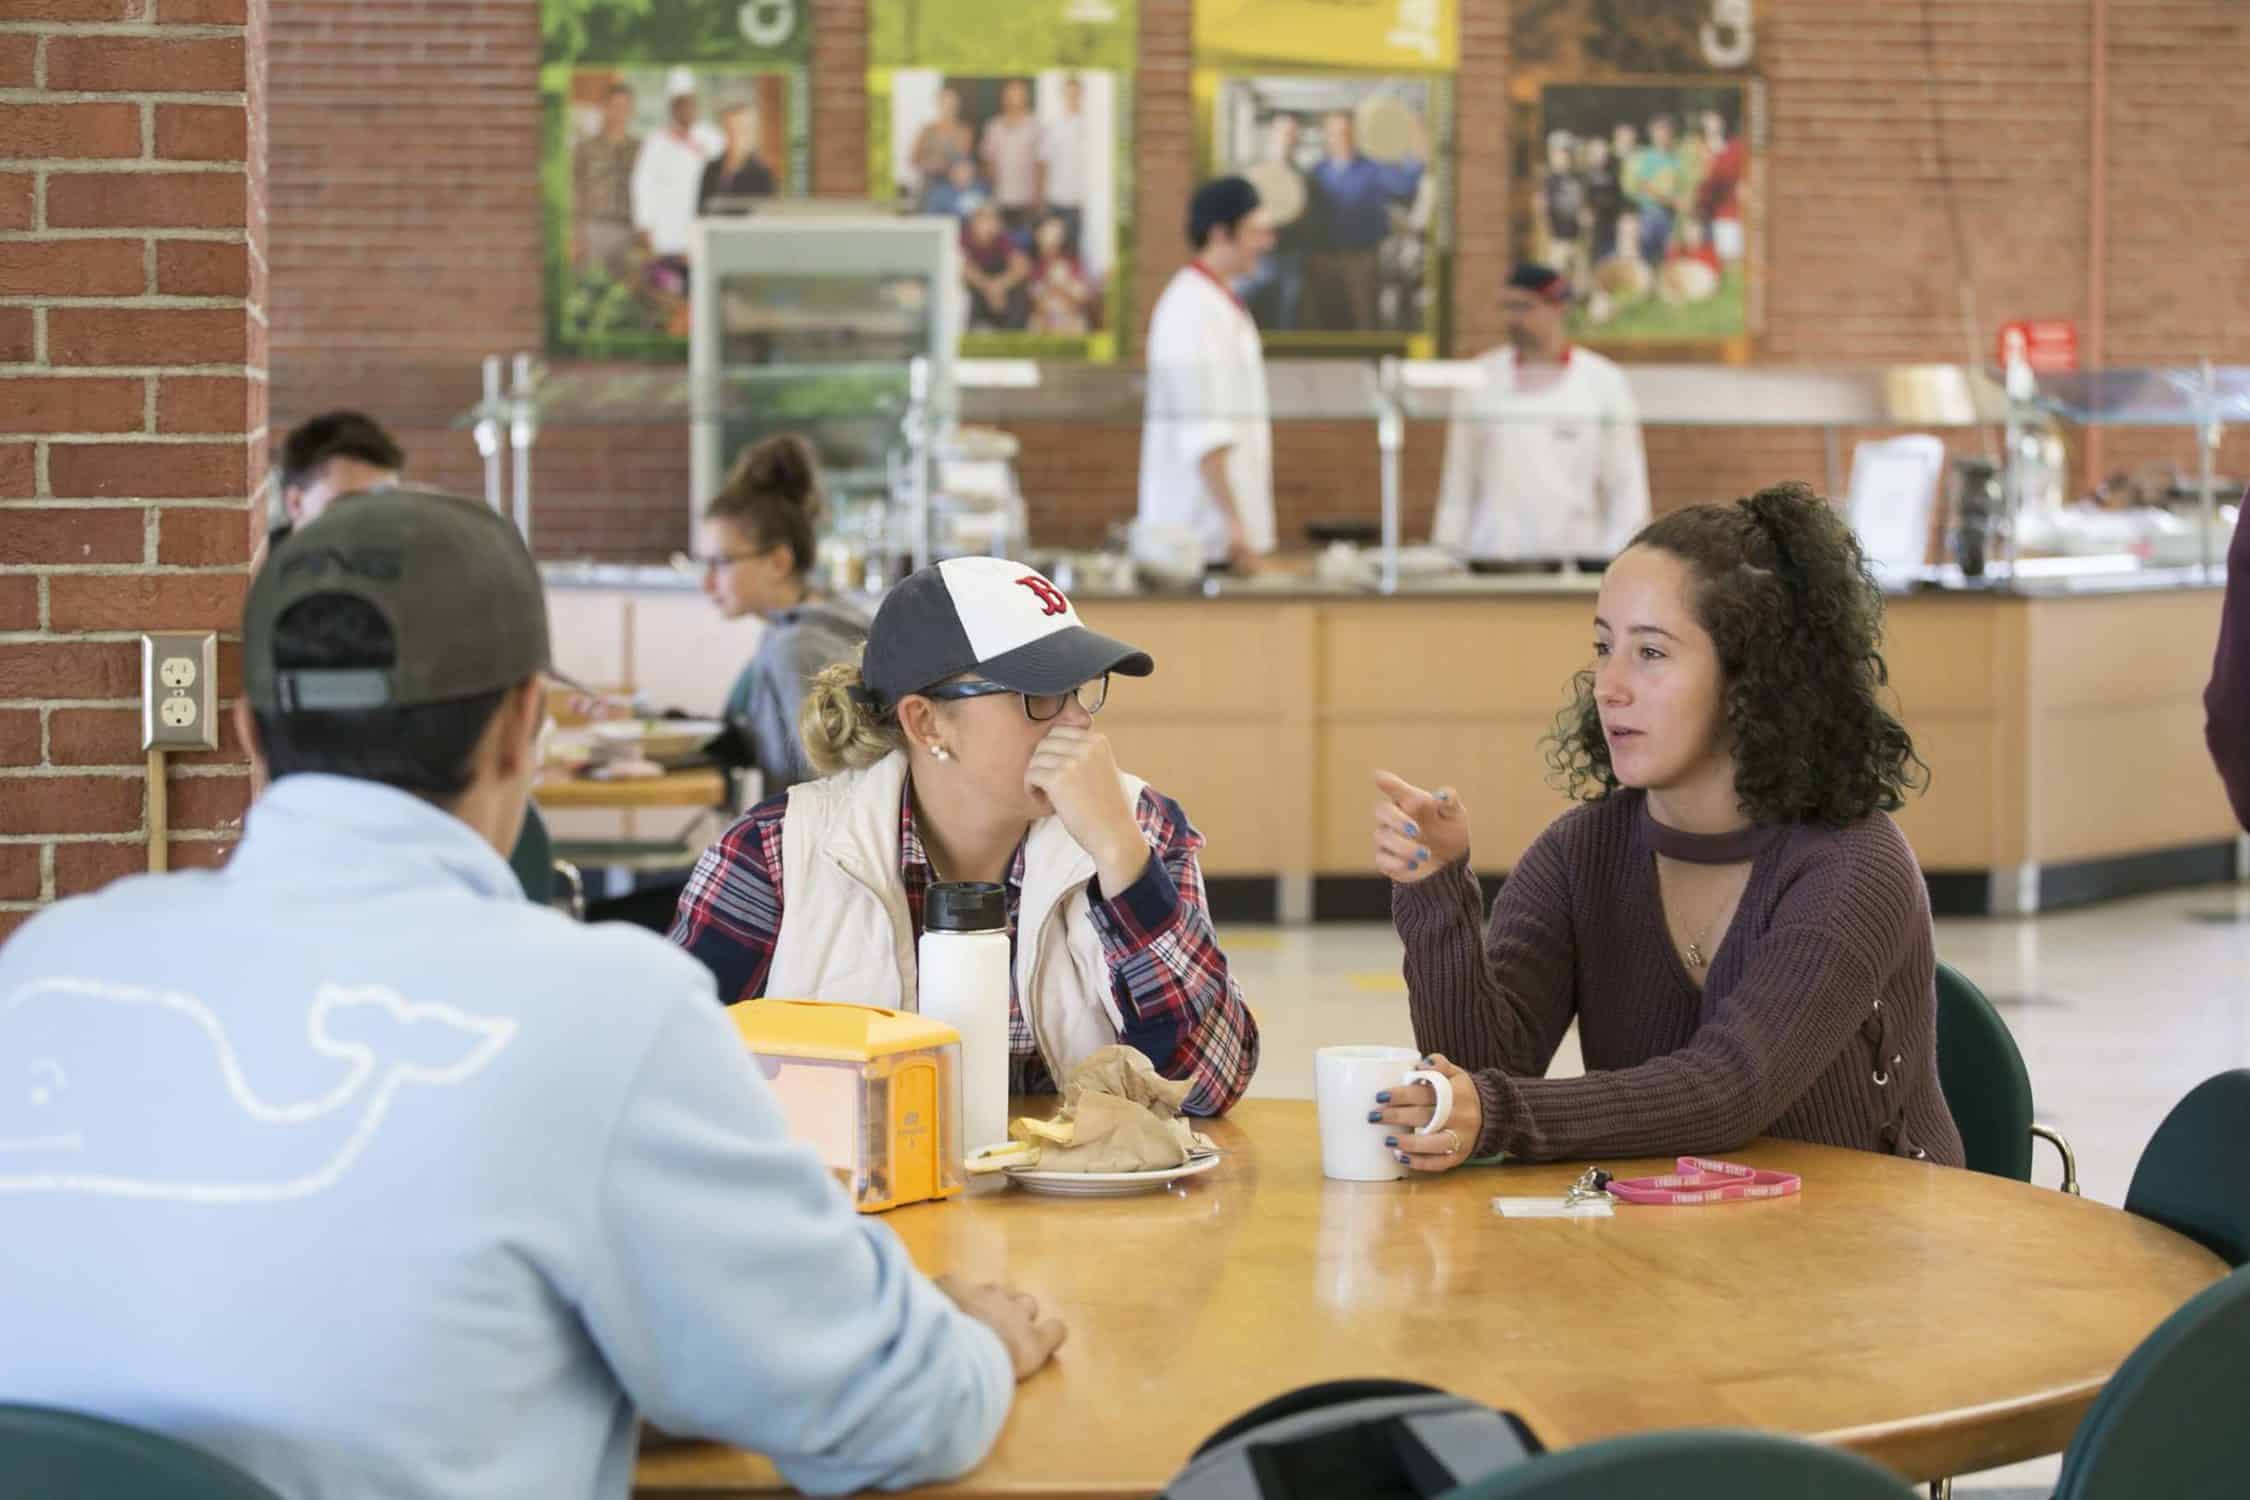 Students talk at a table in the dining hall on campus